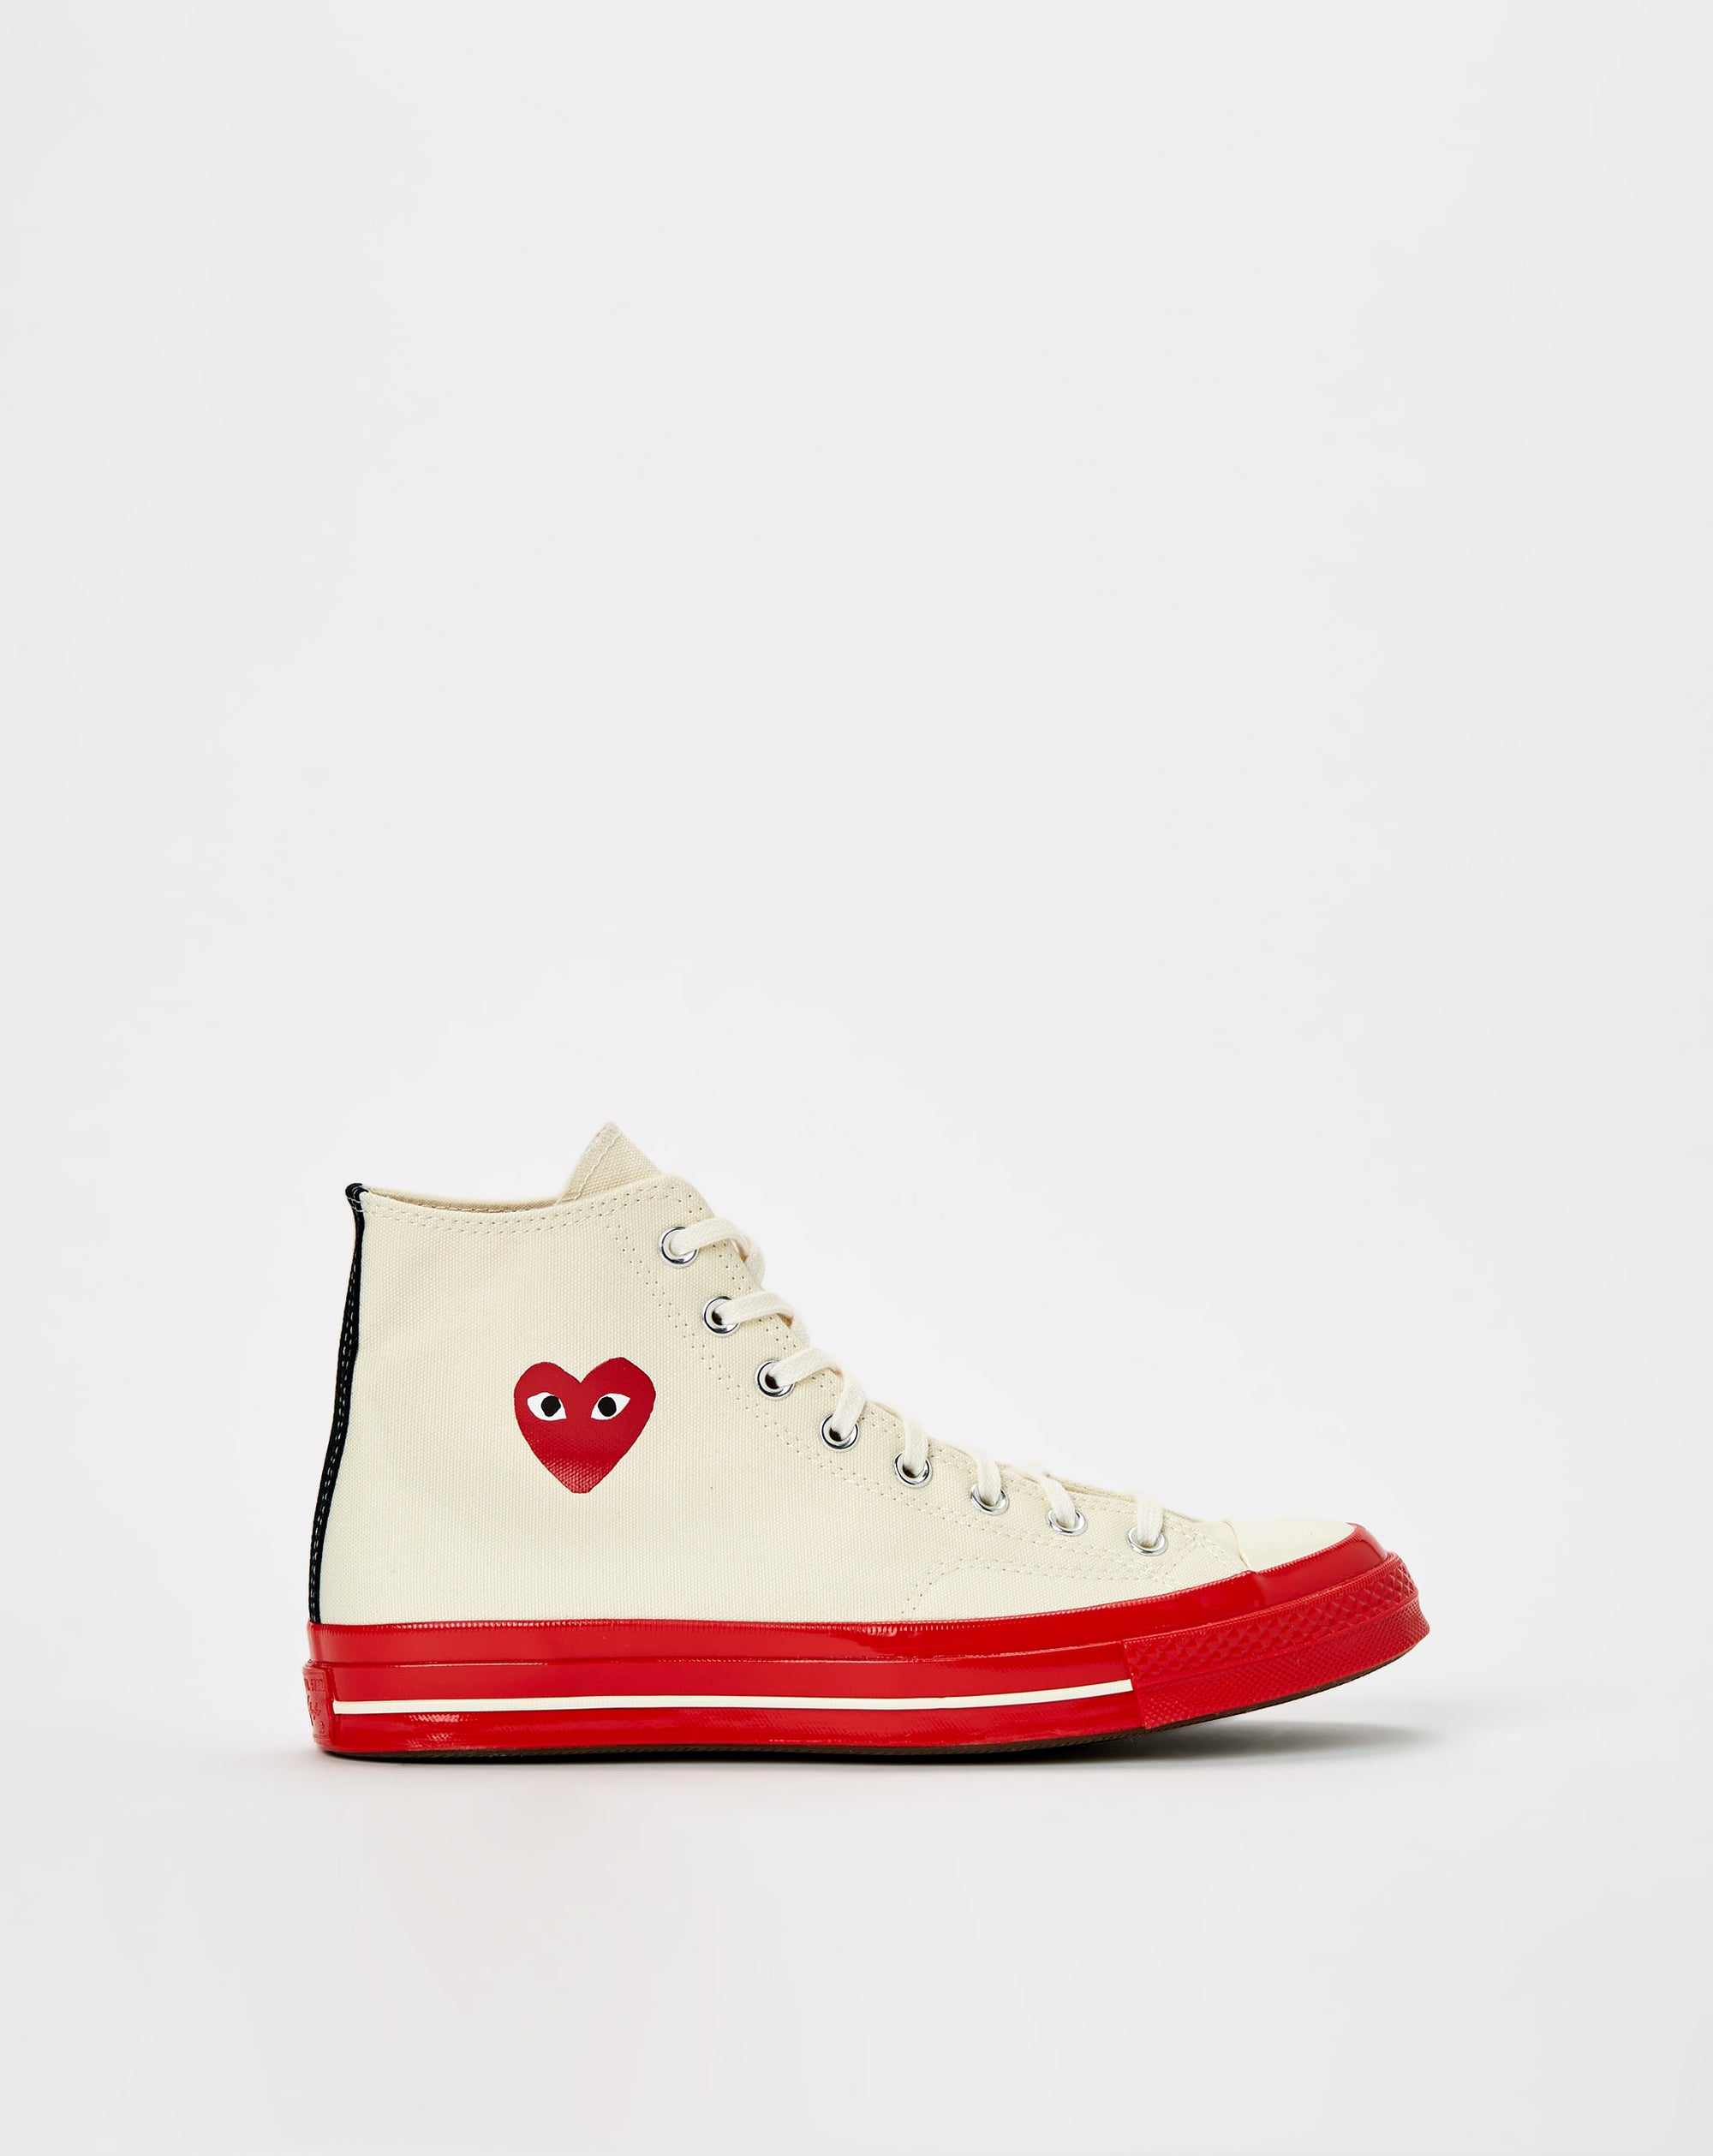 Converse - Comme des Garcons Play x Red Sole High Top - Off White Red: P1K124-2 - Rule of